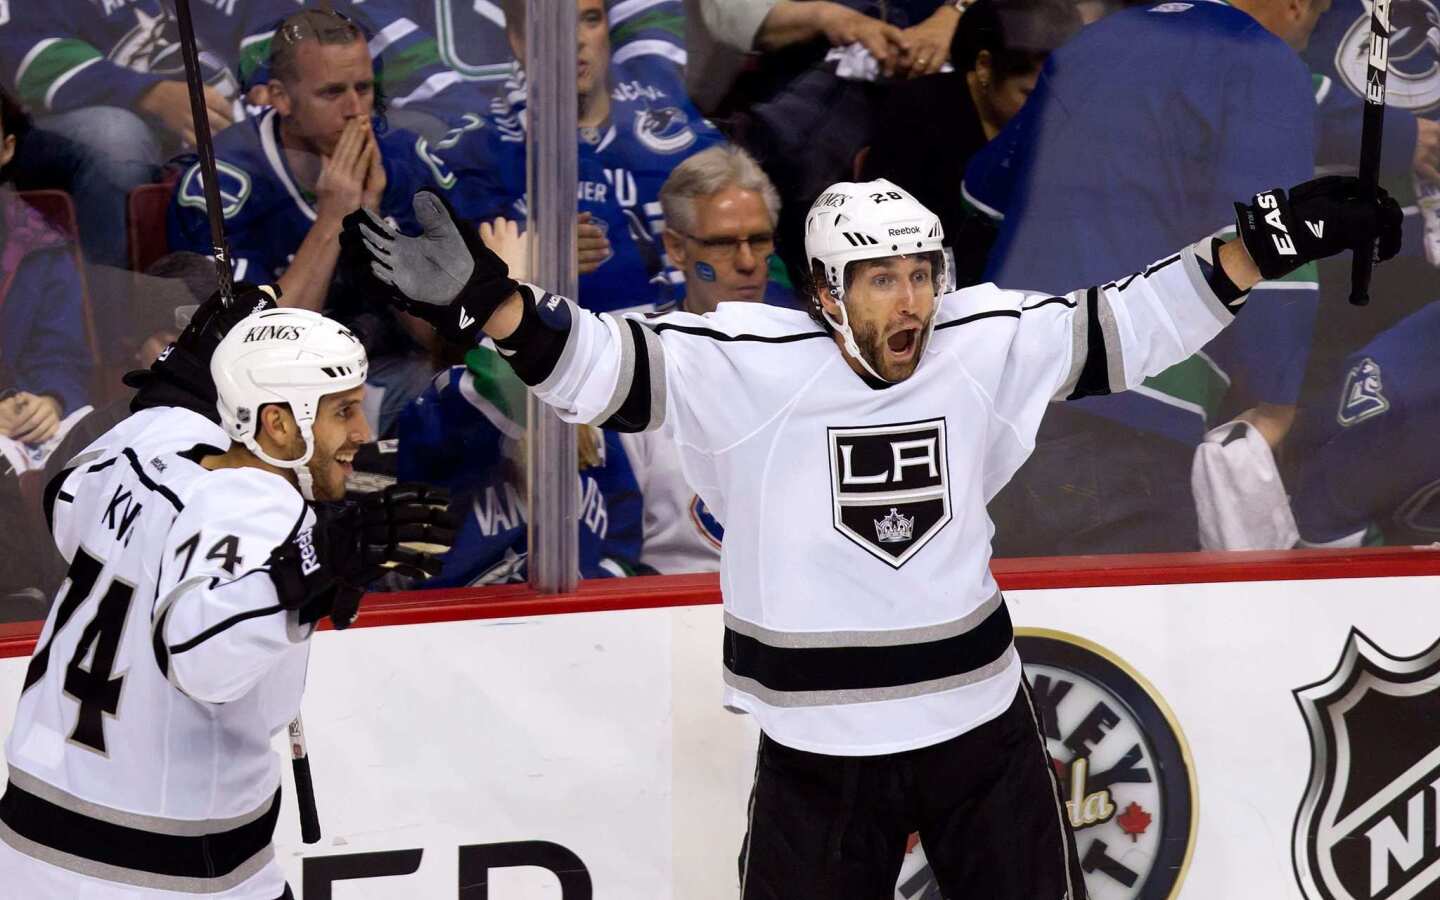 Kings center Jarret Stoll, right, celebrates alongside teammate Dwight King after scoring in overtime to lift the Kings to a 2-1 victory over the Vancouver Canucks in Game 5 of the Western Conference quarterfinals.